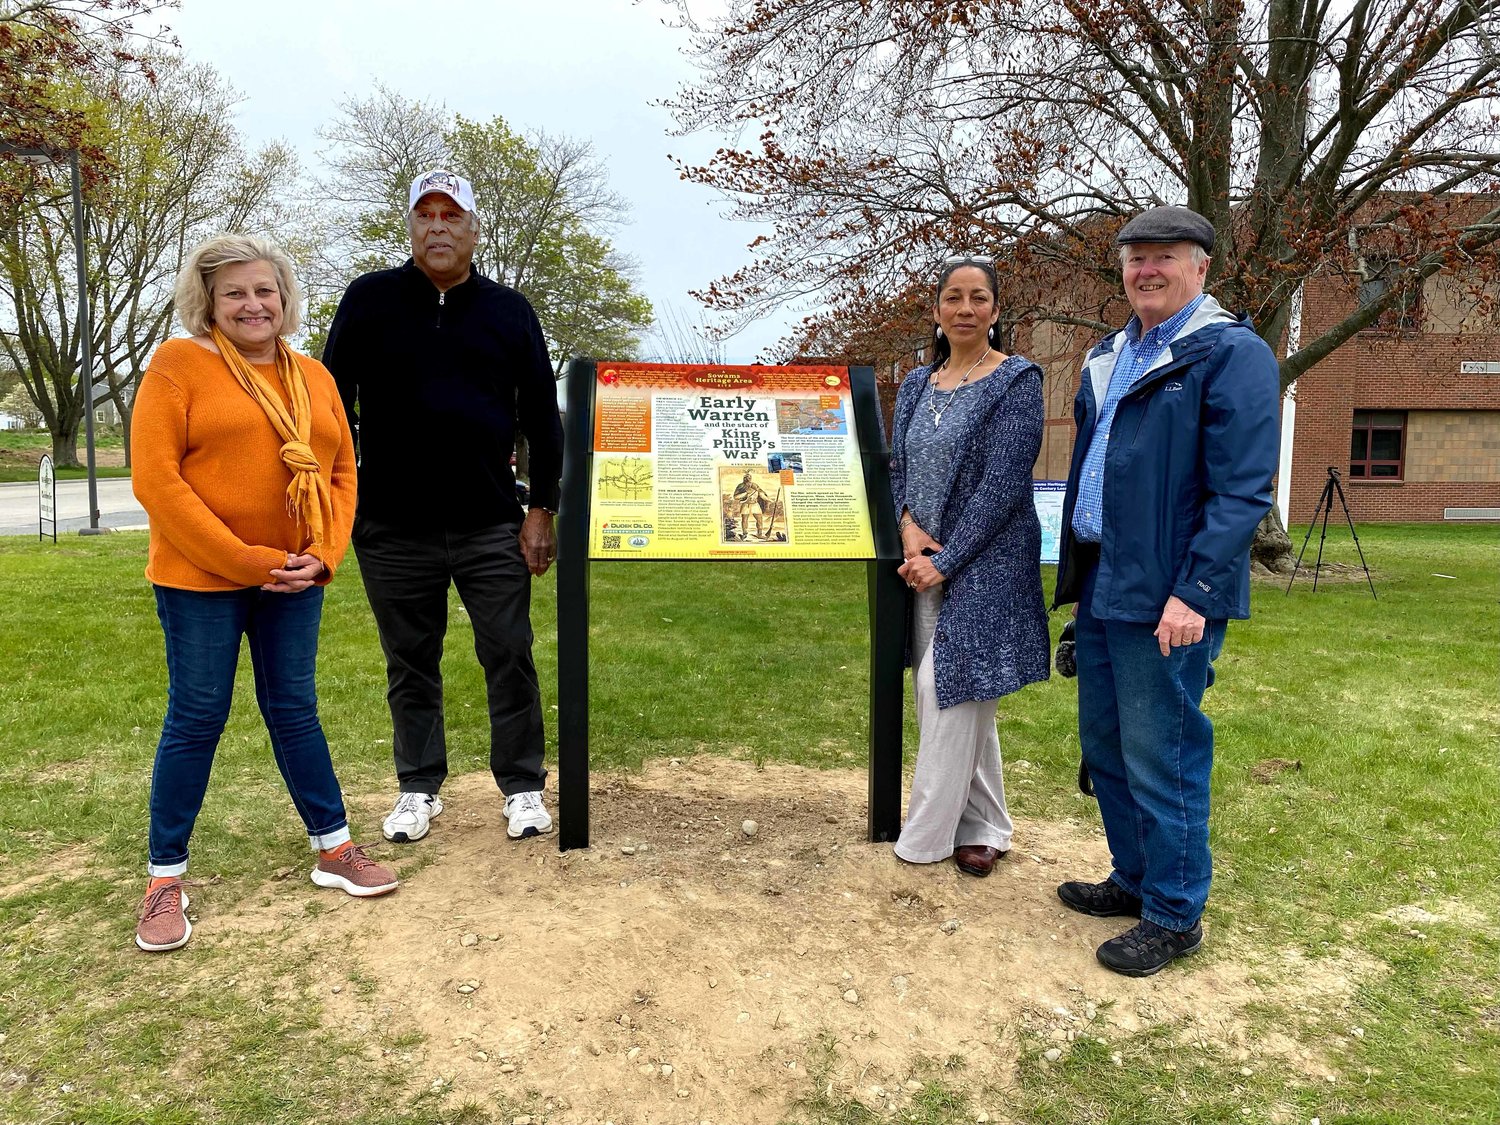 Marker designer Karen Dionne, Pokanoket Sagamore William Guy and Sachem Tracey Brown, and Sowams Heritage Area Project Coordinator David Weed pose for a photo with the newly installed marker.